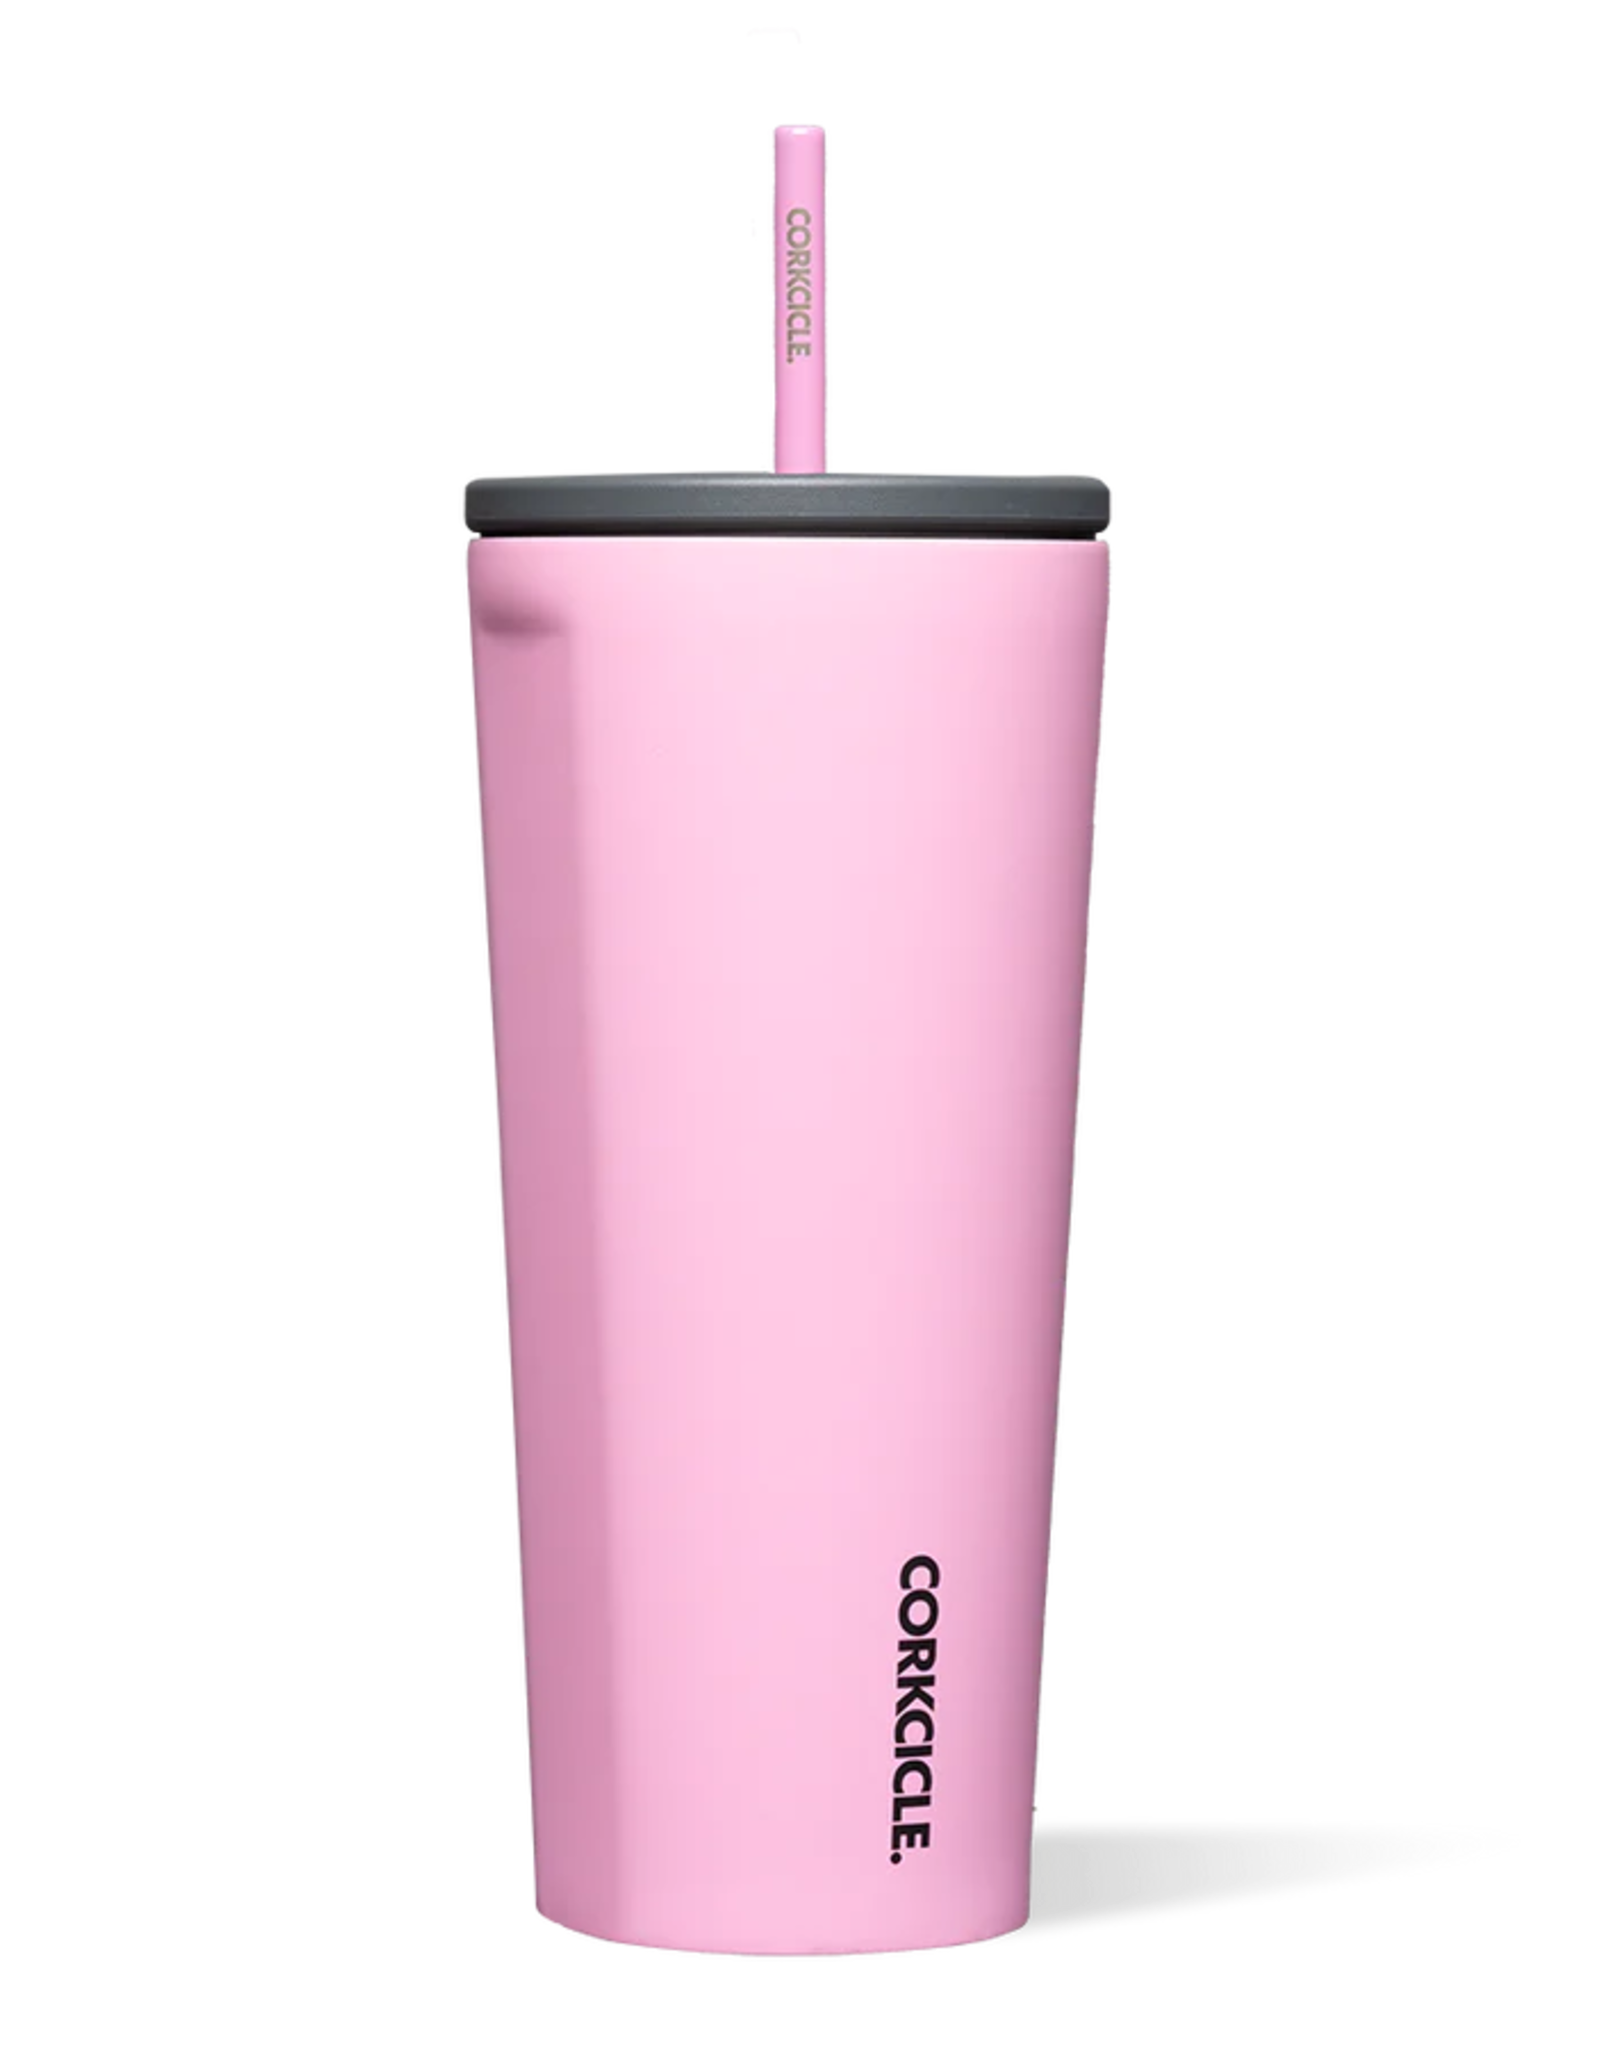 Corkcicle Corkcicle Sun-Soaked Pink Collection